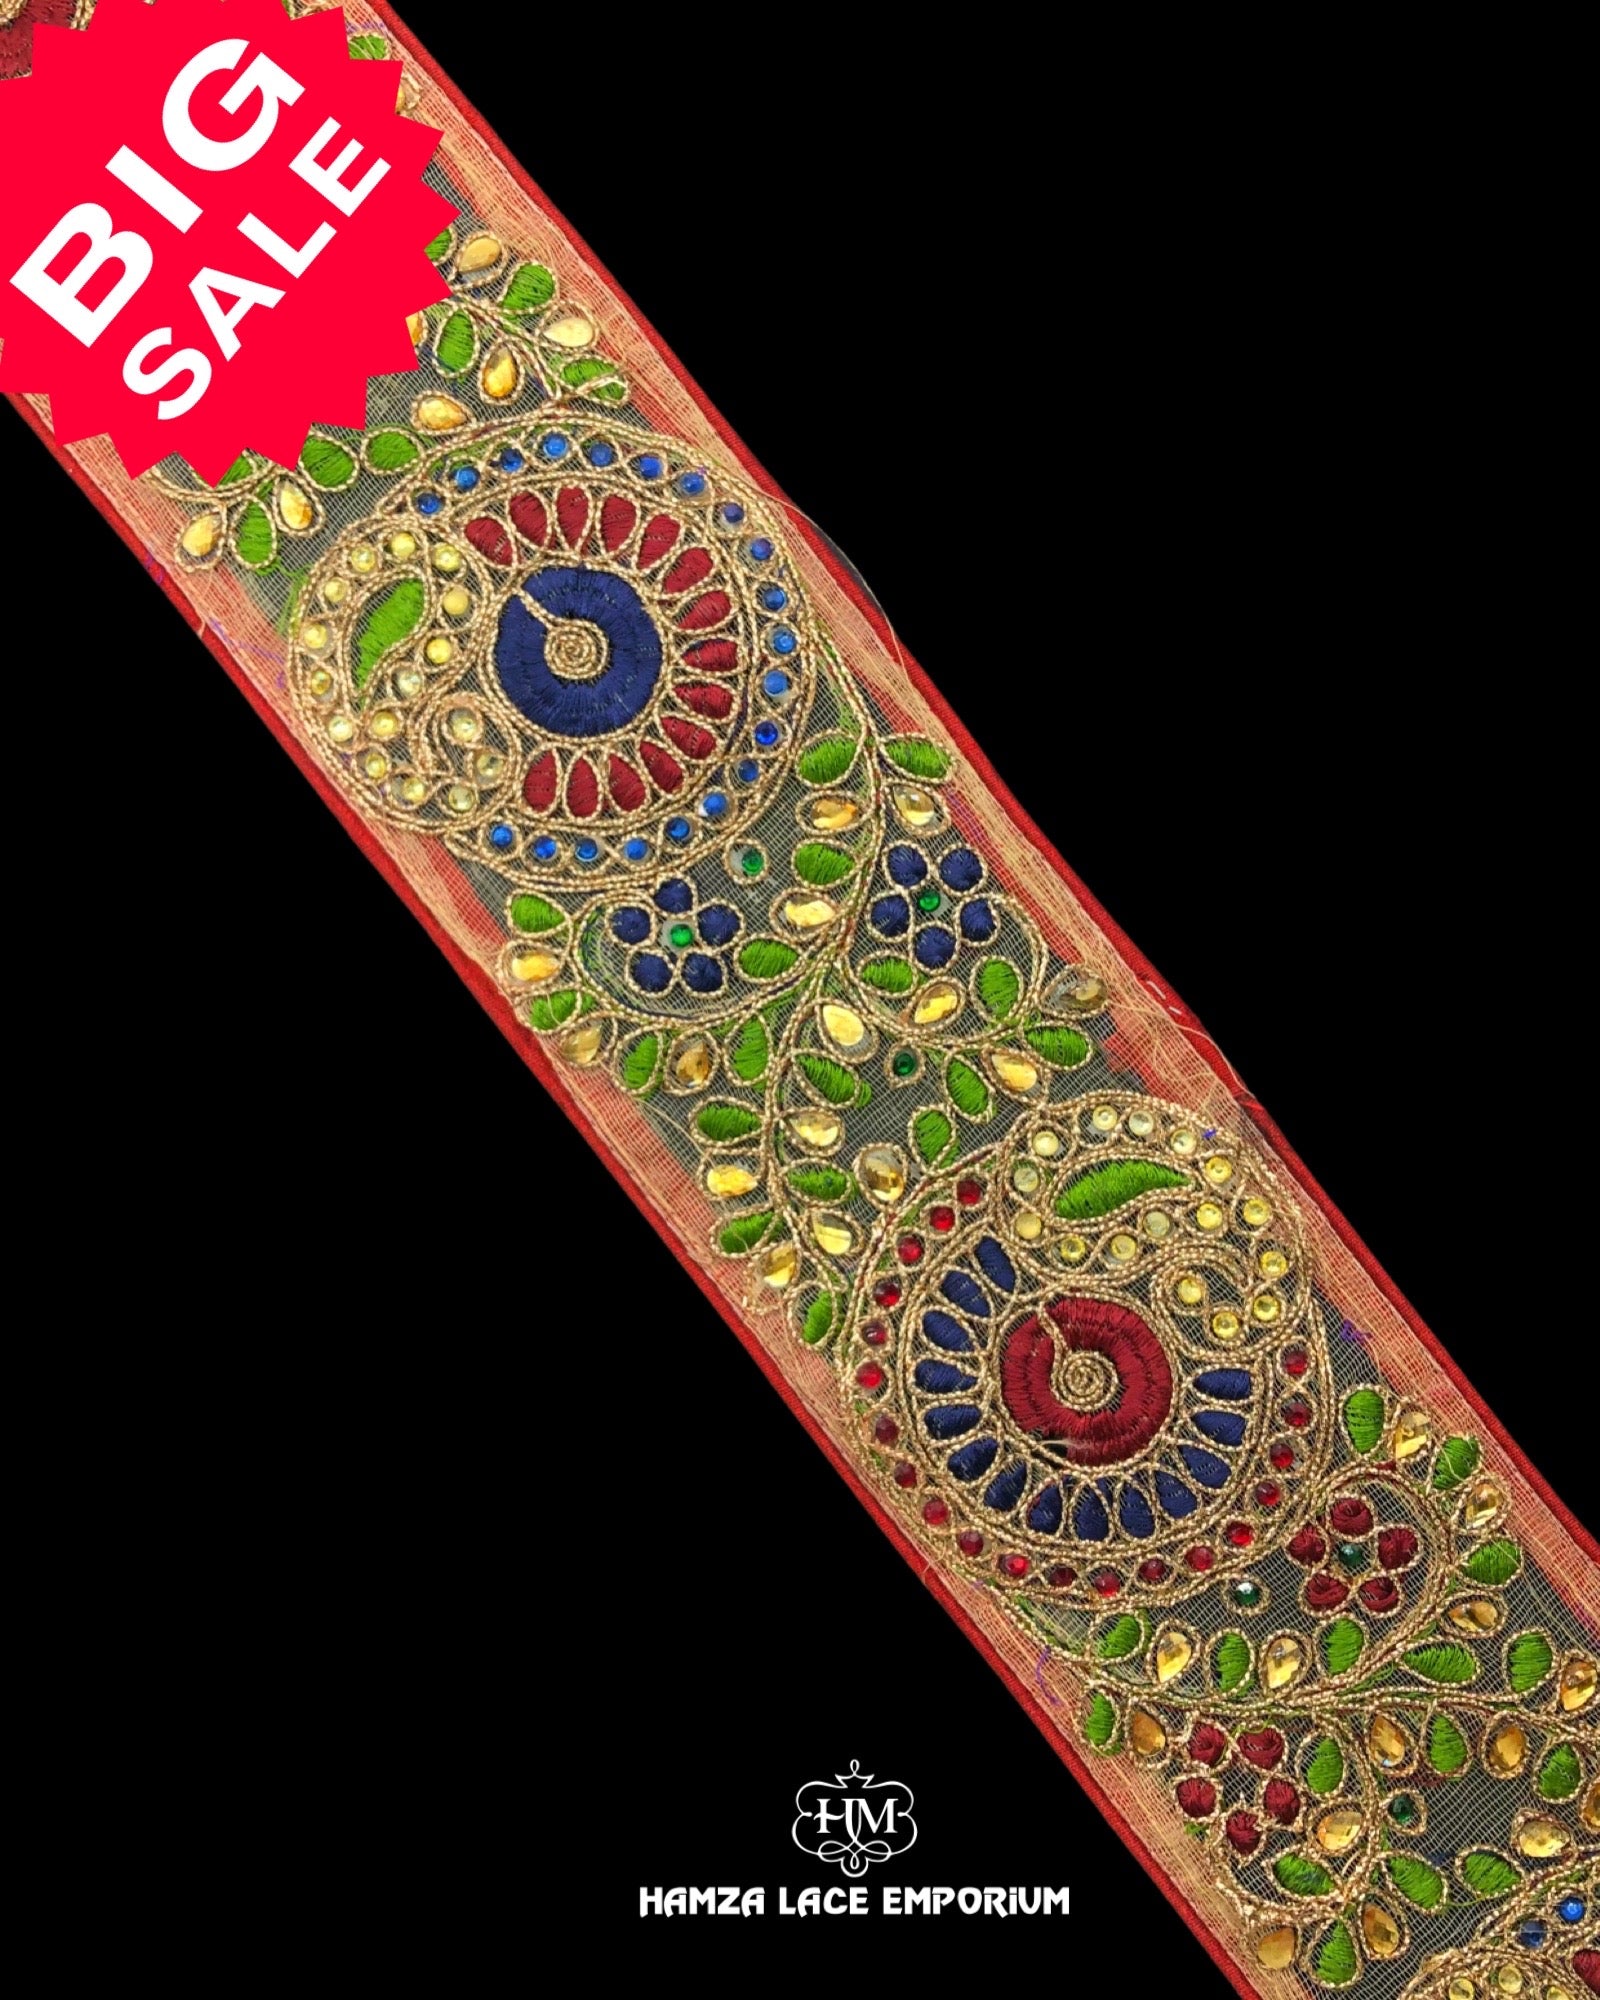 'Multi Colored Kundan Work Lace 5.75 Yard Piece' with the name 'Hamza Lace' written at the bottom